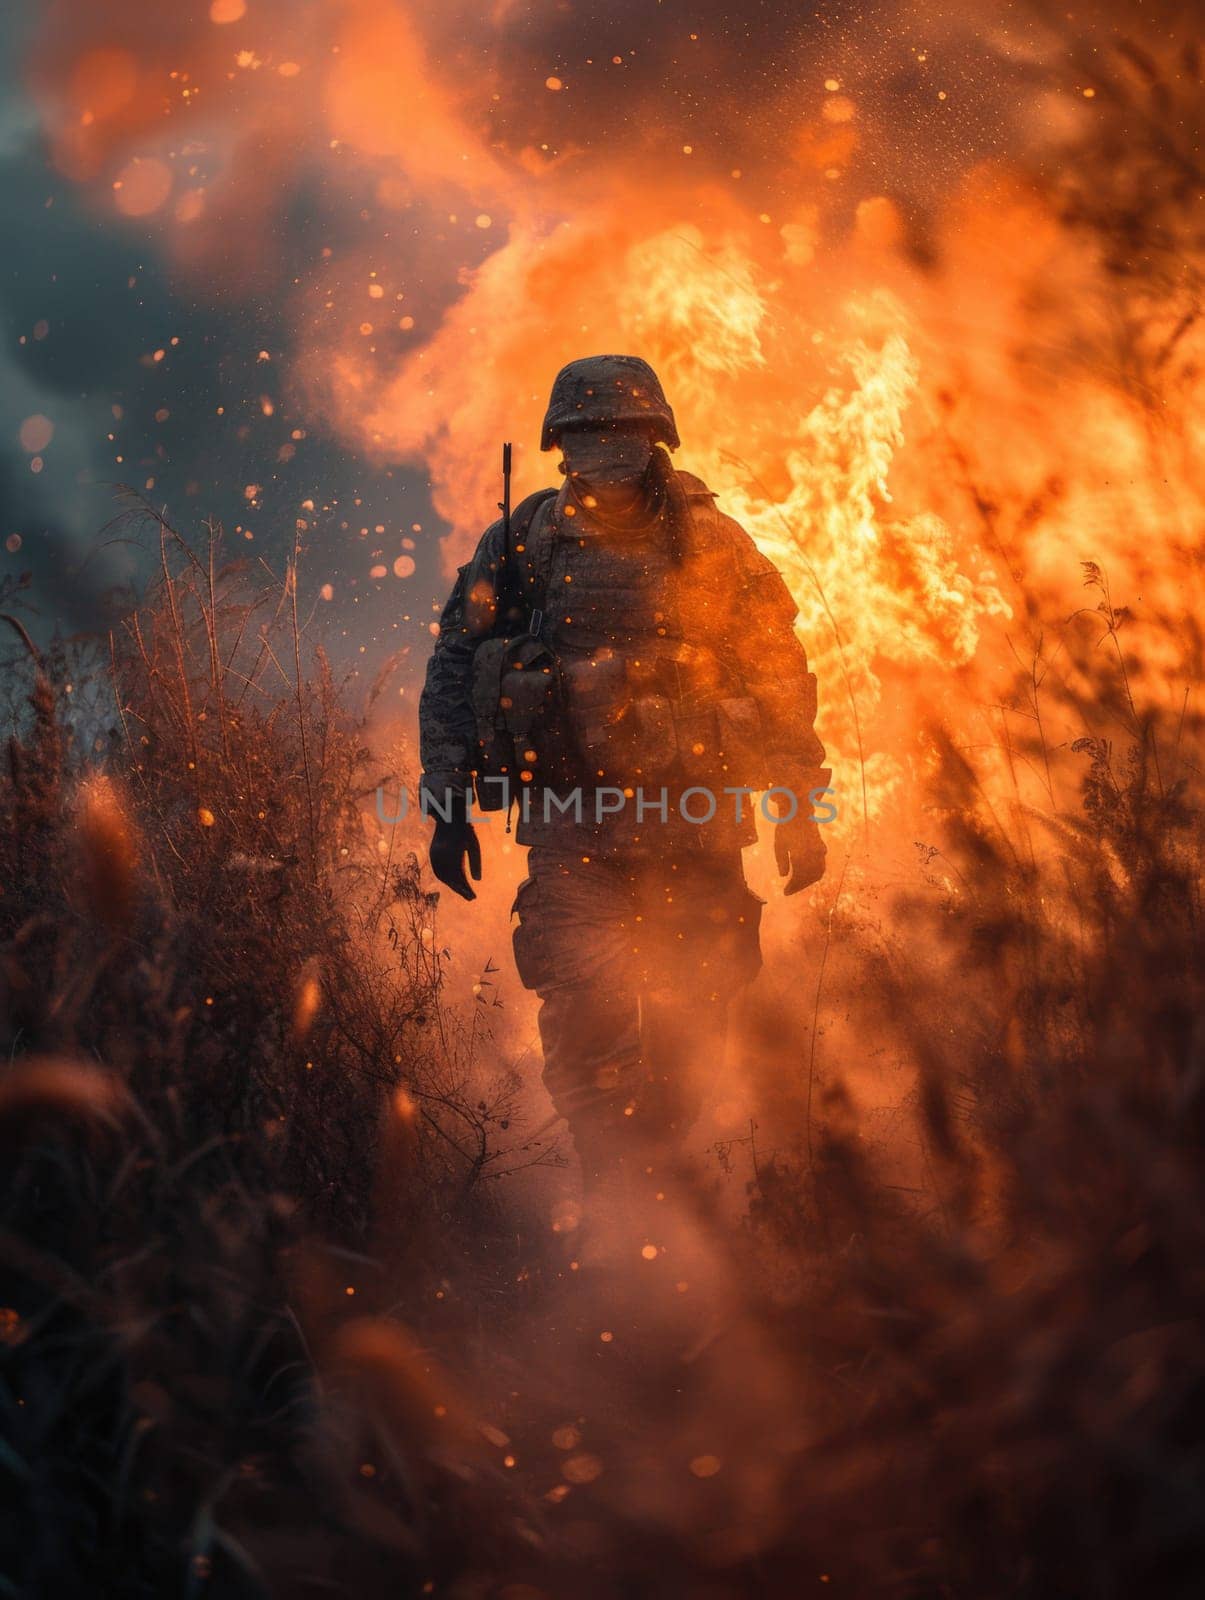 A man confidently walks through a field as a fire burns fiercely in the background.